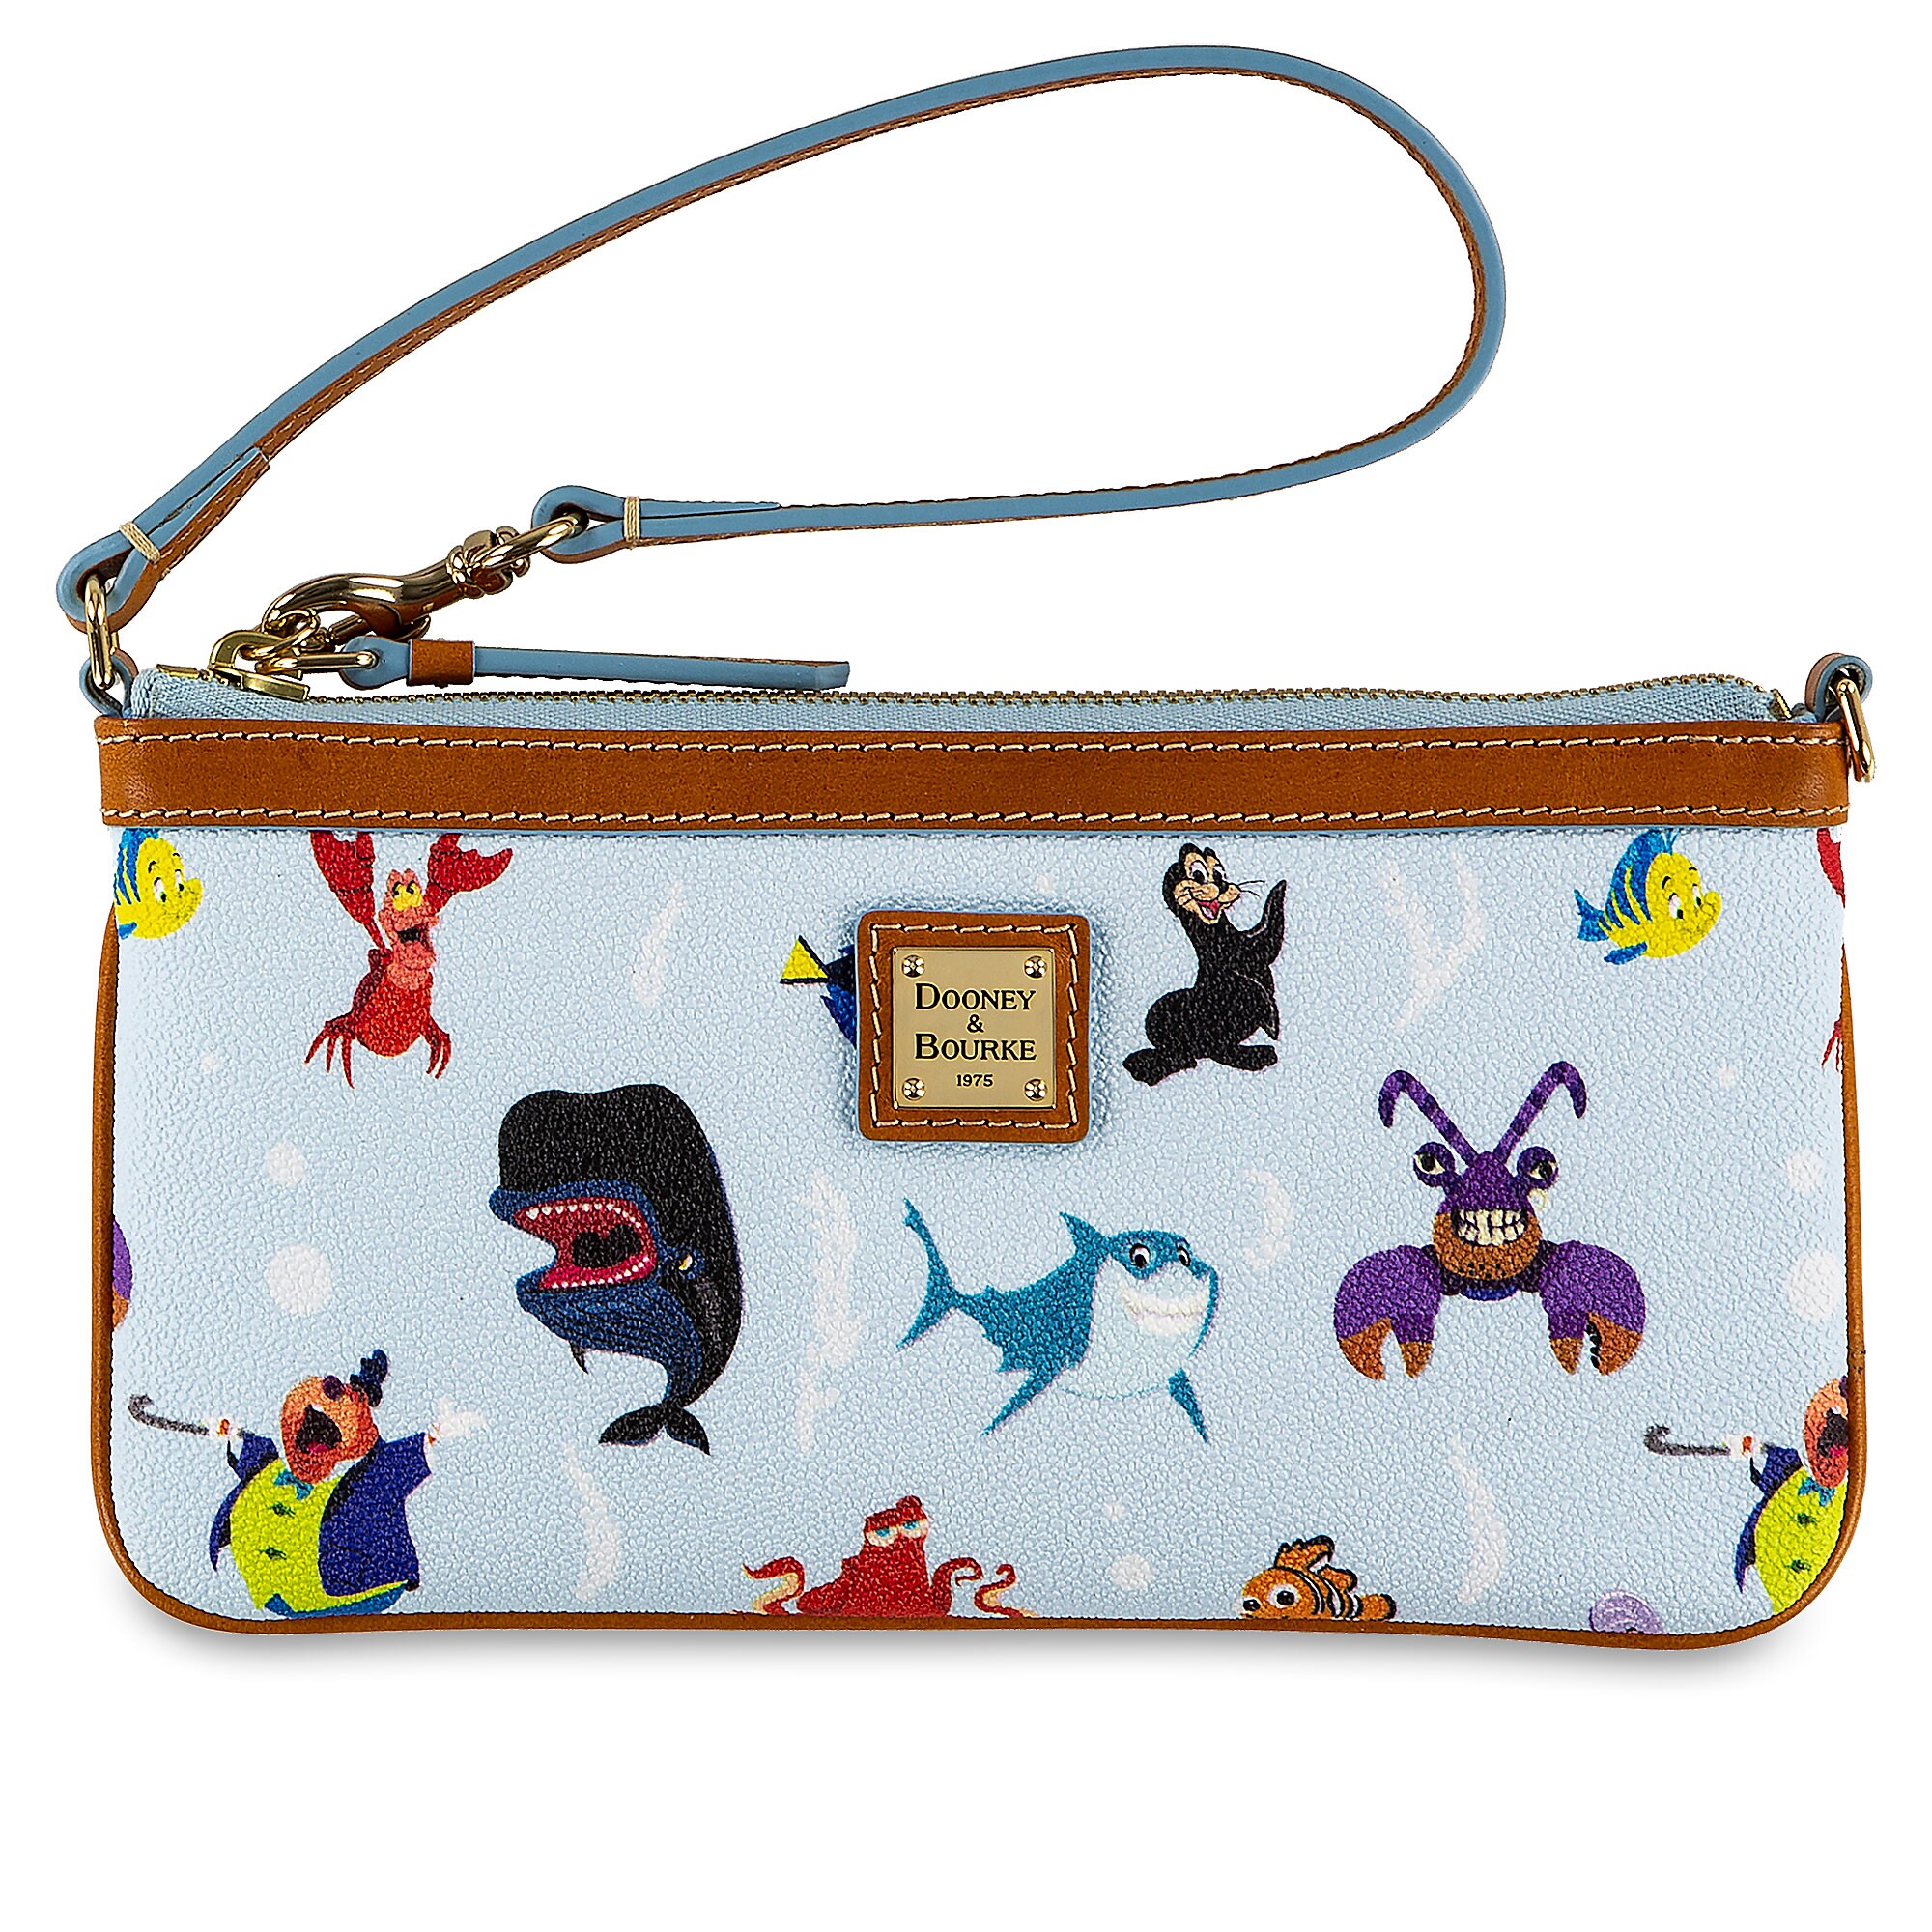 Out to Sea Wristlet by Dooney & Bourke